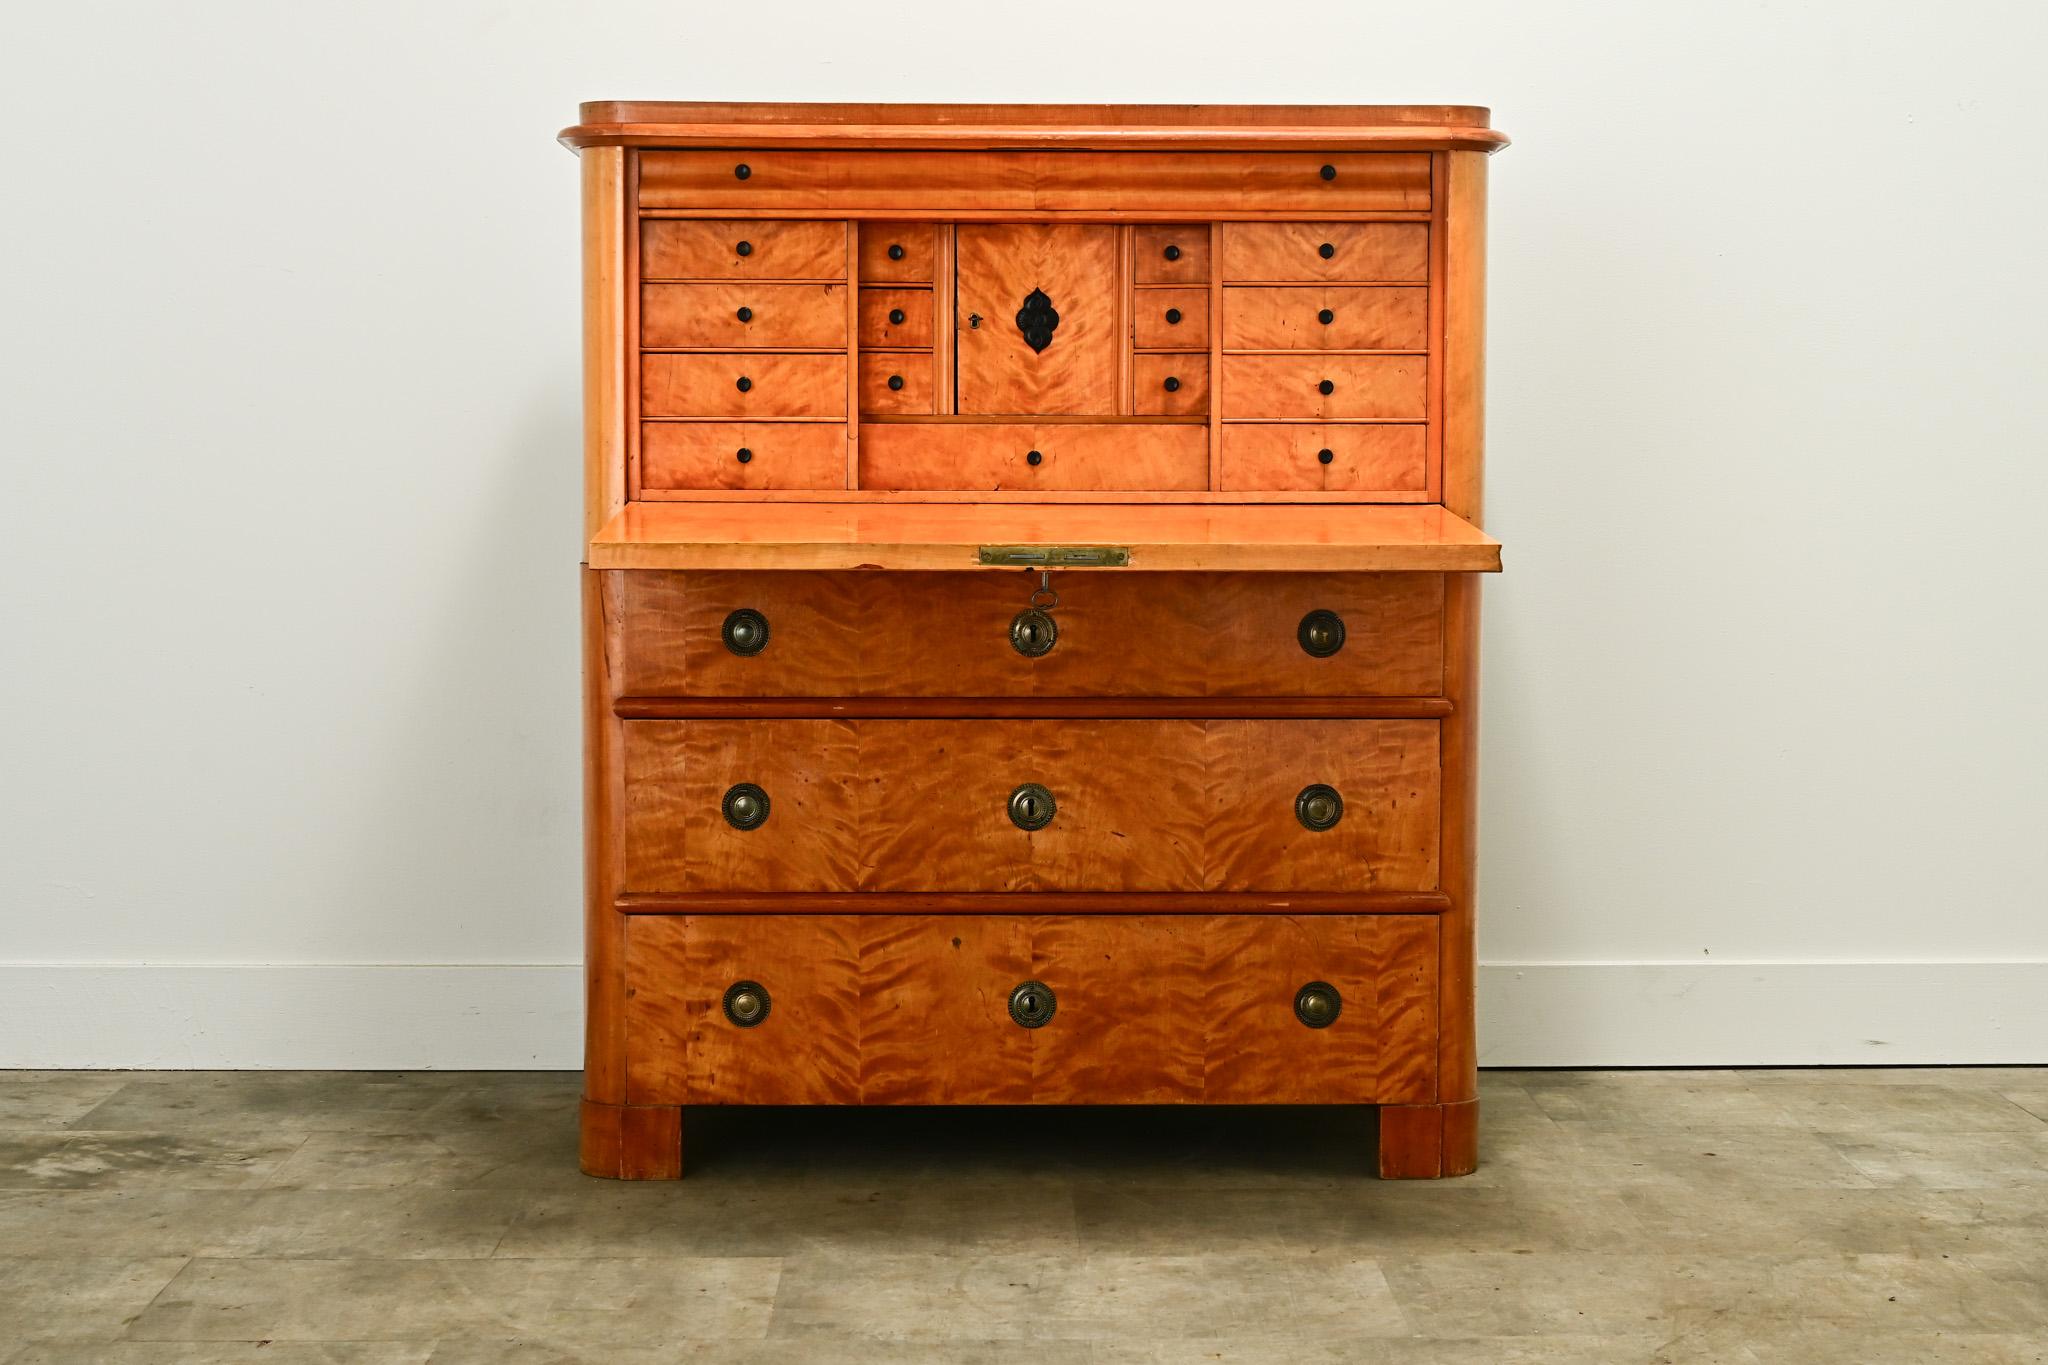 An impressive 19th century birch secretary made in the Netherlands circa 1800. The exterior is simple in design, celebrating the beautifully figured burl and bookmatched birch wood. At the top the cabinet has a carved bone escutcheon plate opening